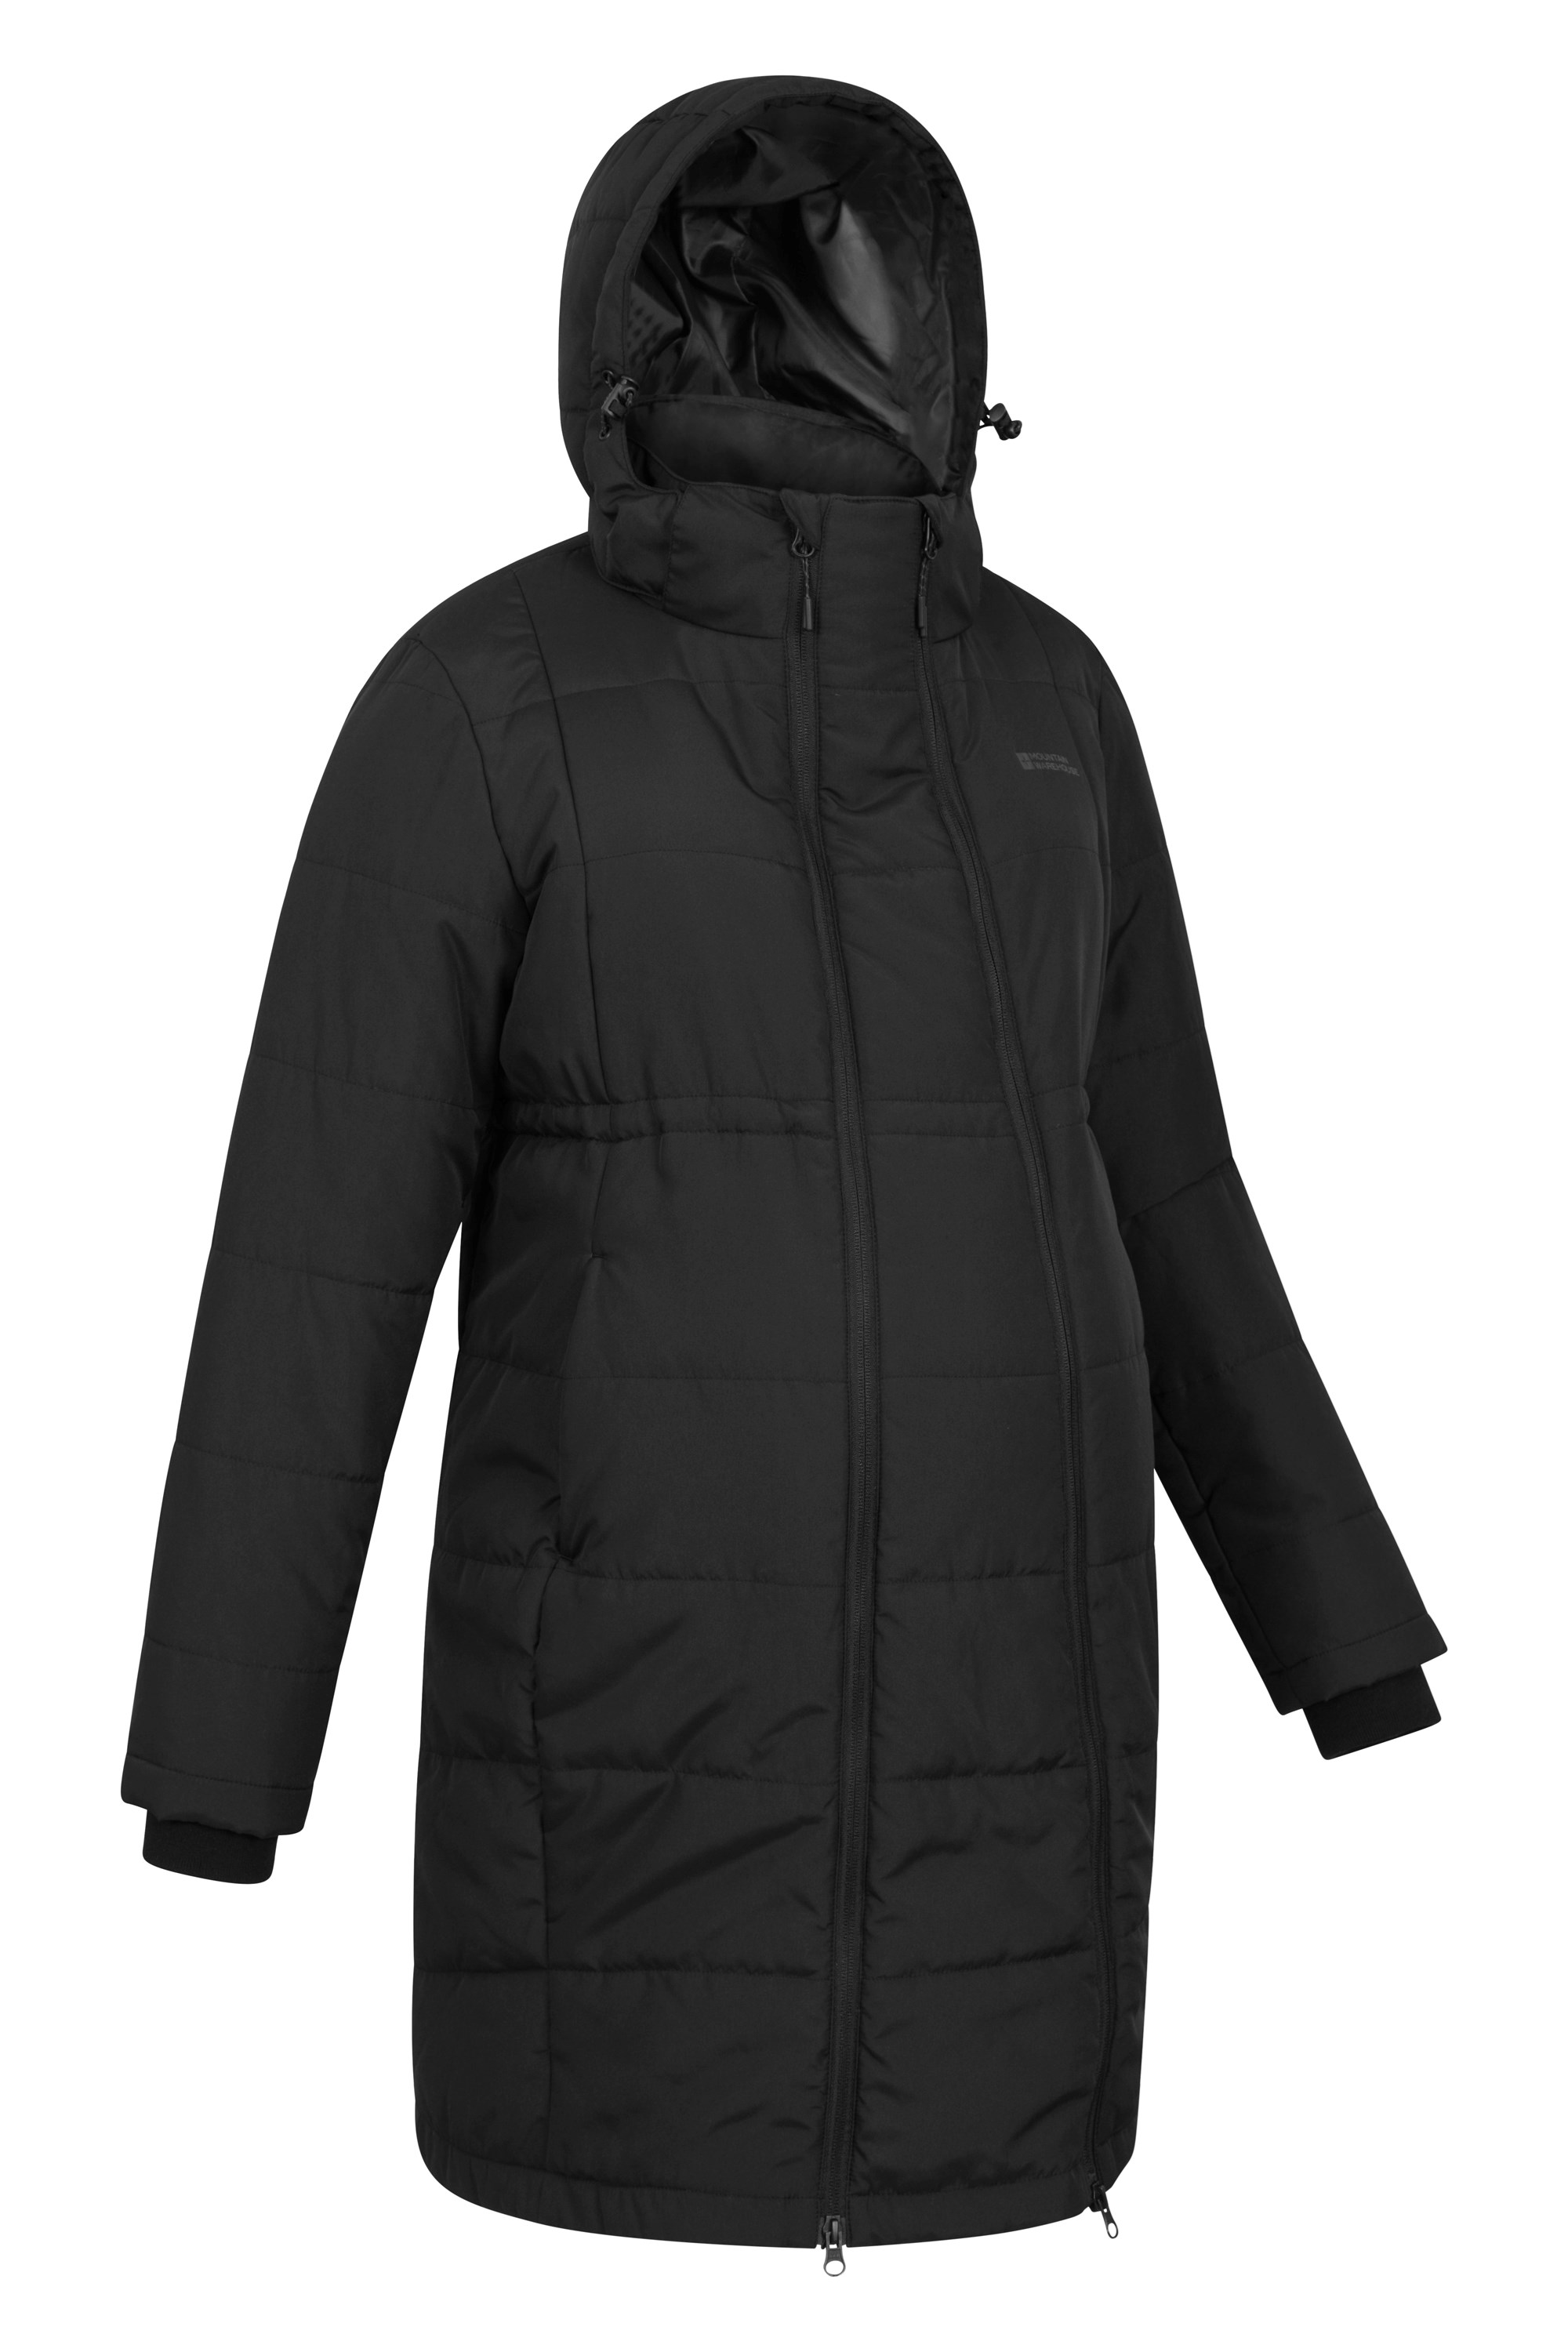 Maternity Amethyst Womens Long Insulated Jacket